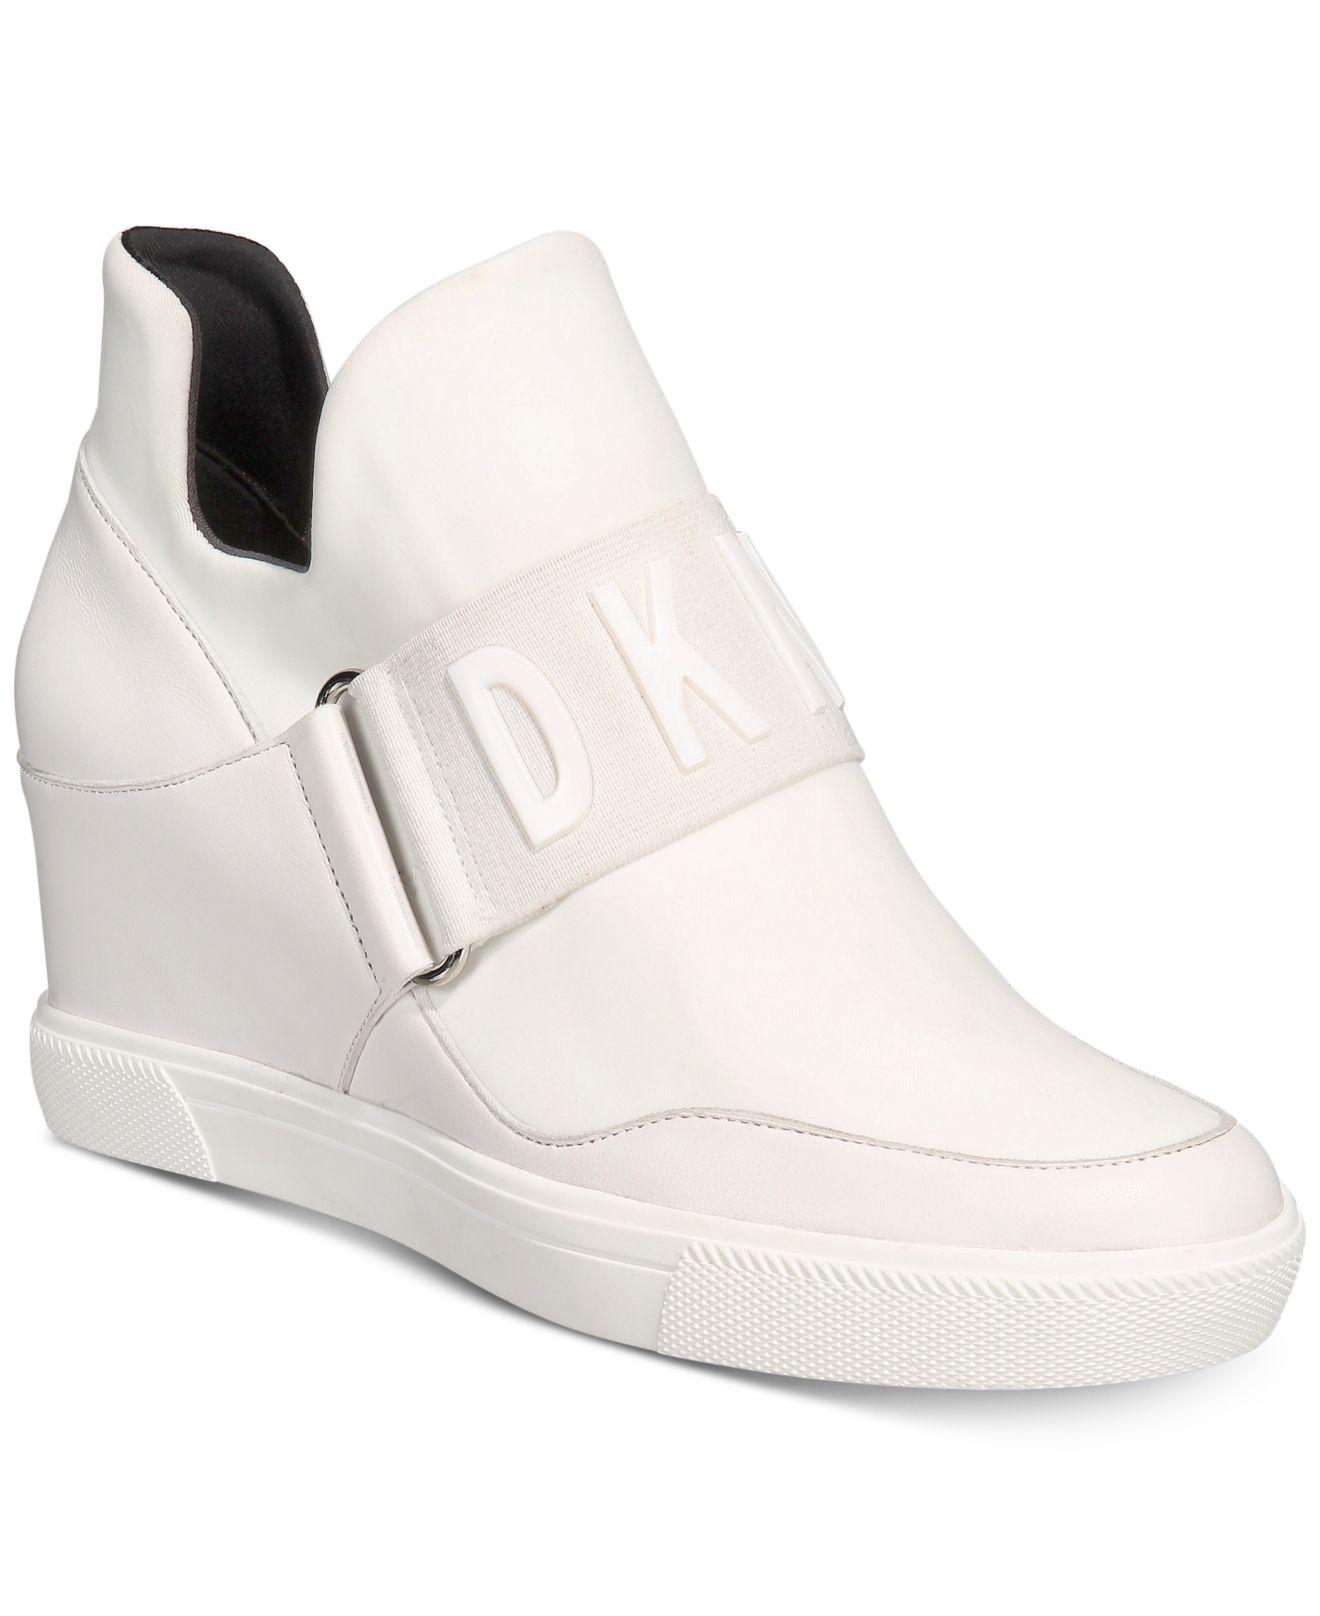 DKNY Cosmos Platform Sneakers, Created For Macy's in White - Lyst